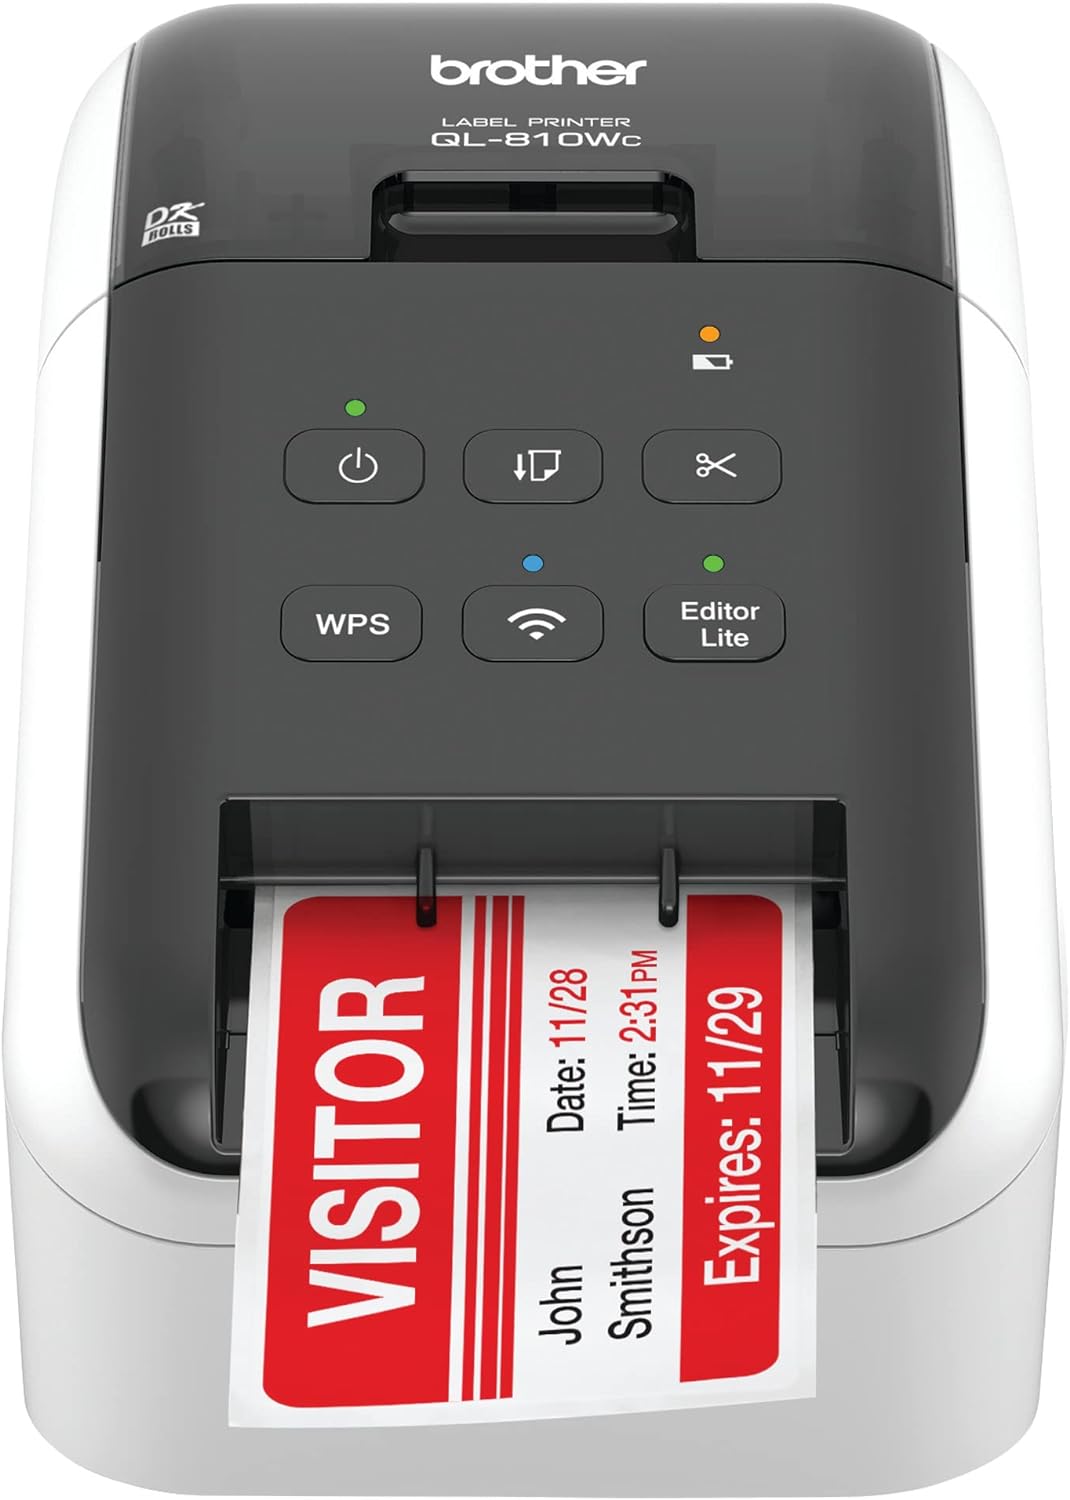 Weighing Brother Printer Wireless, Fast Electronic Label (QL810W), Black